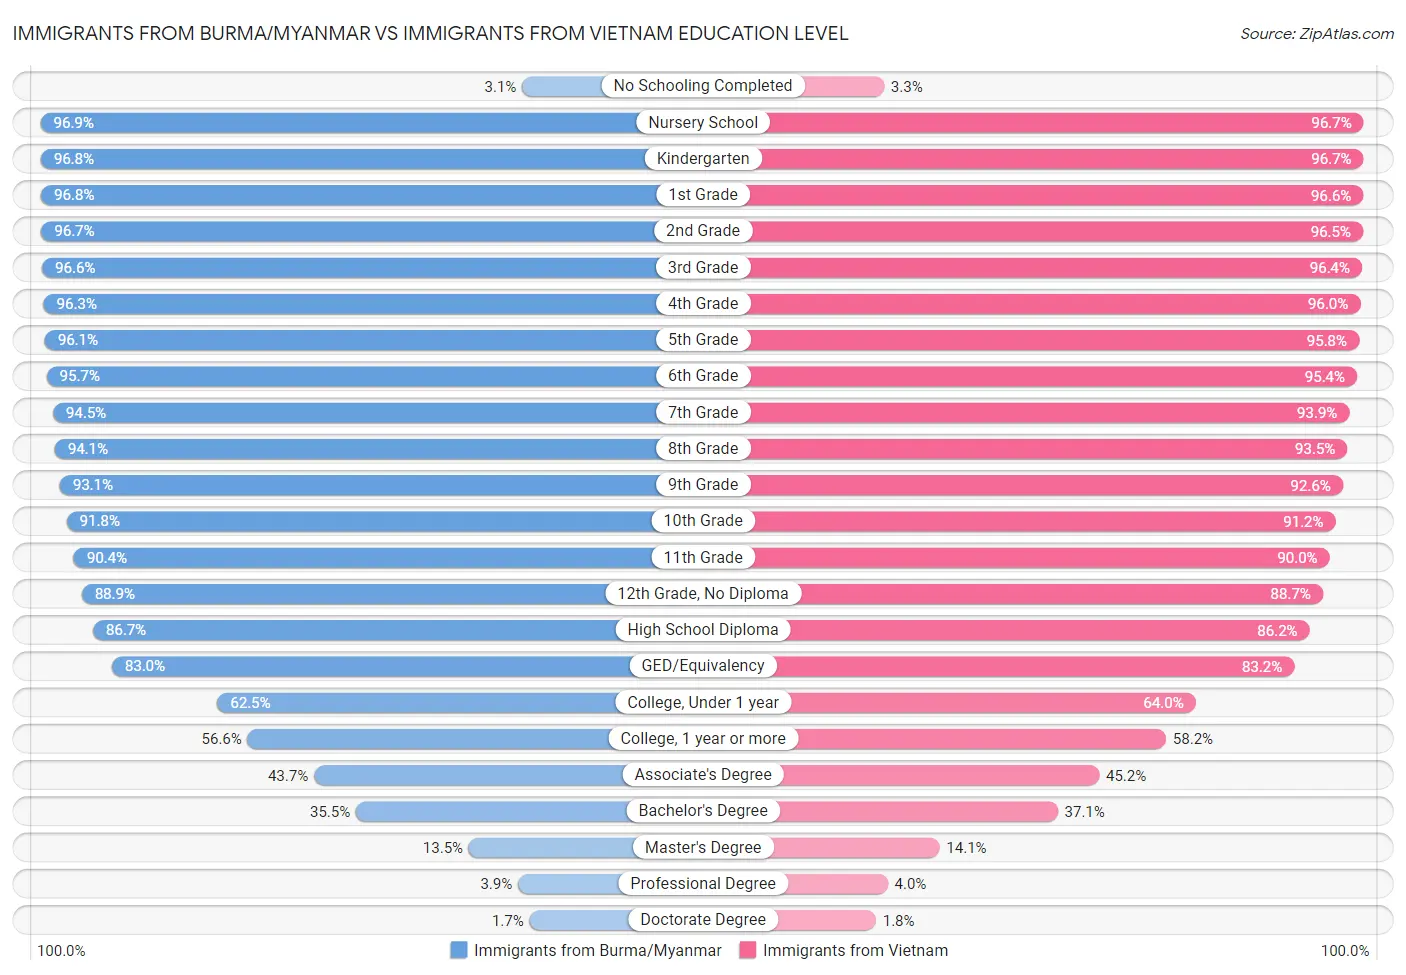 Immigrants from Burma/Myanmar vs Immigrants from Vietnam Education Level